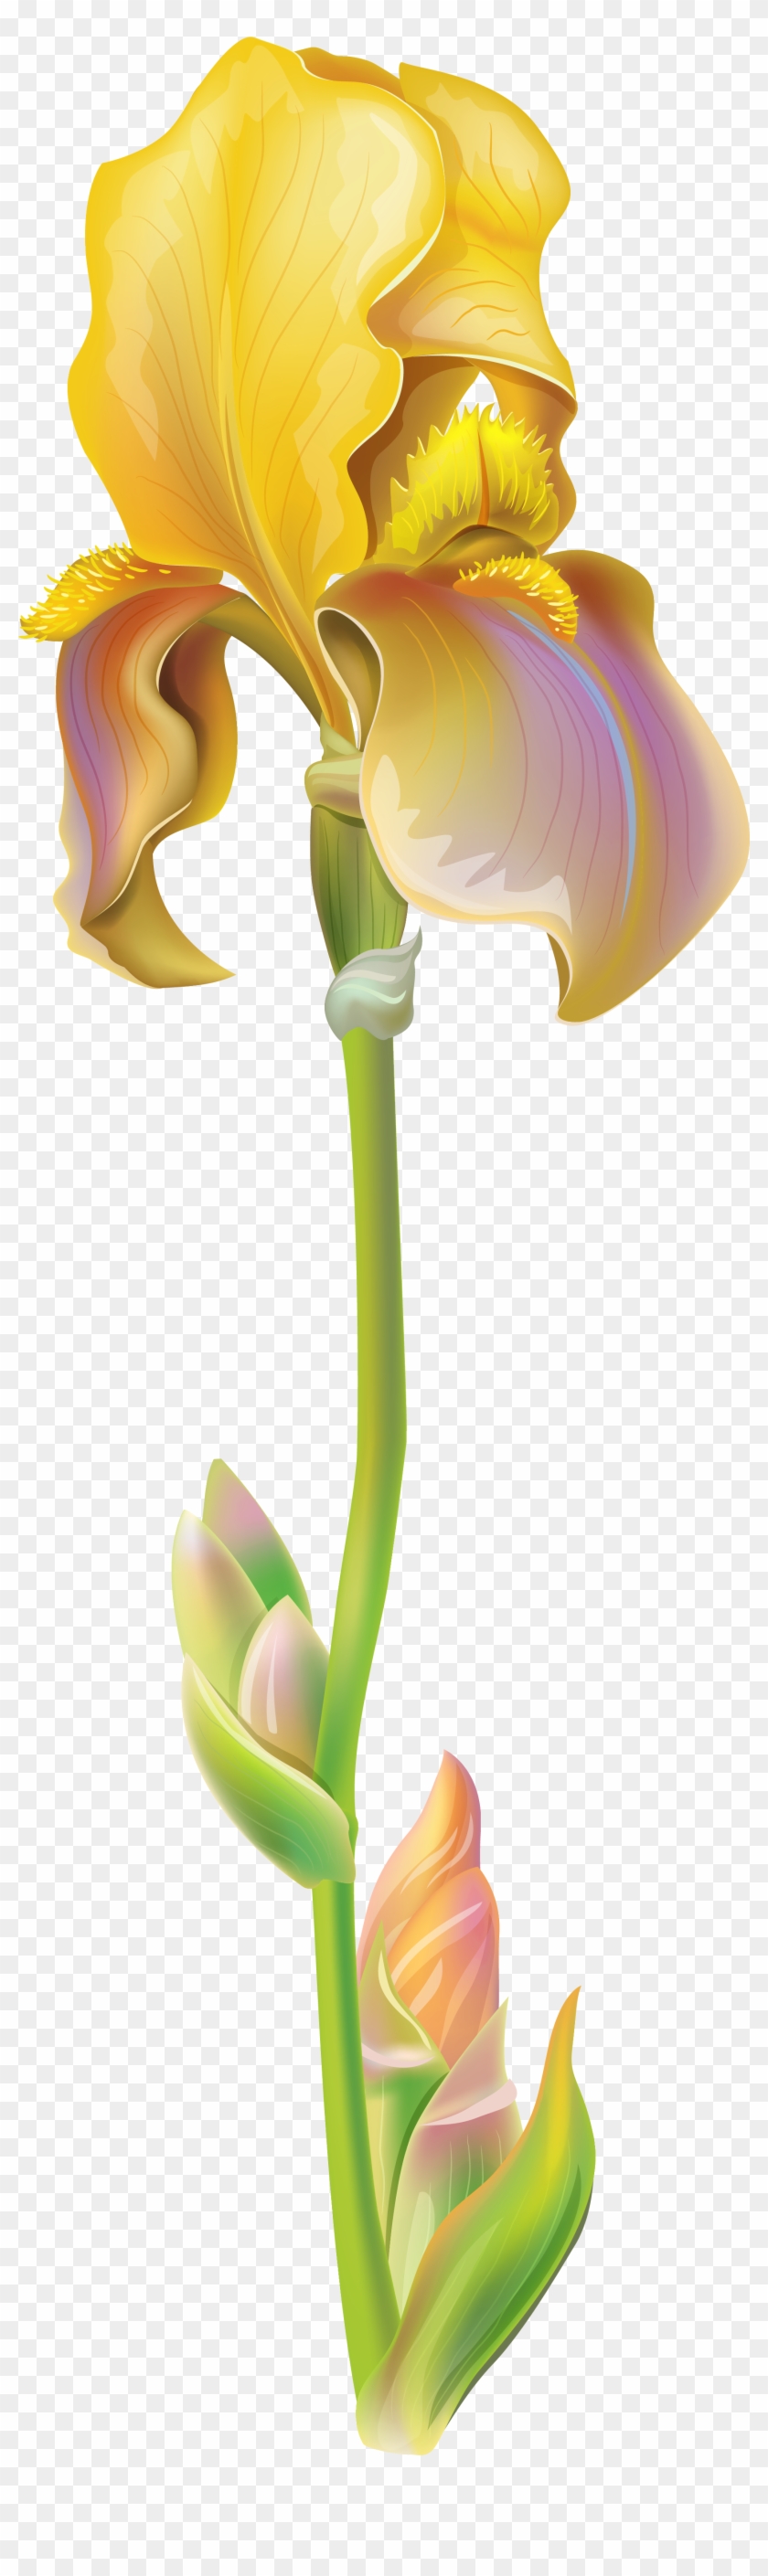 Free Cliparts Download Clip Art On Clipart - Iris Flower Png Transparent Png #312216